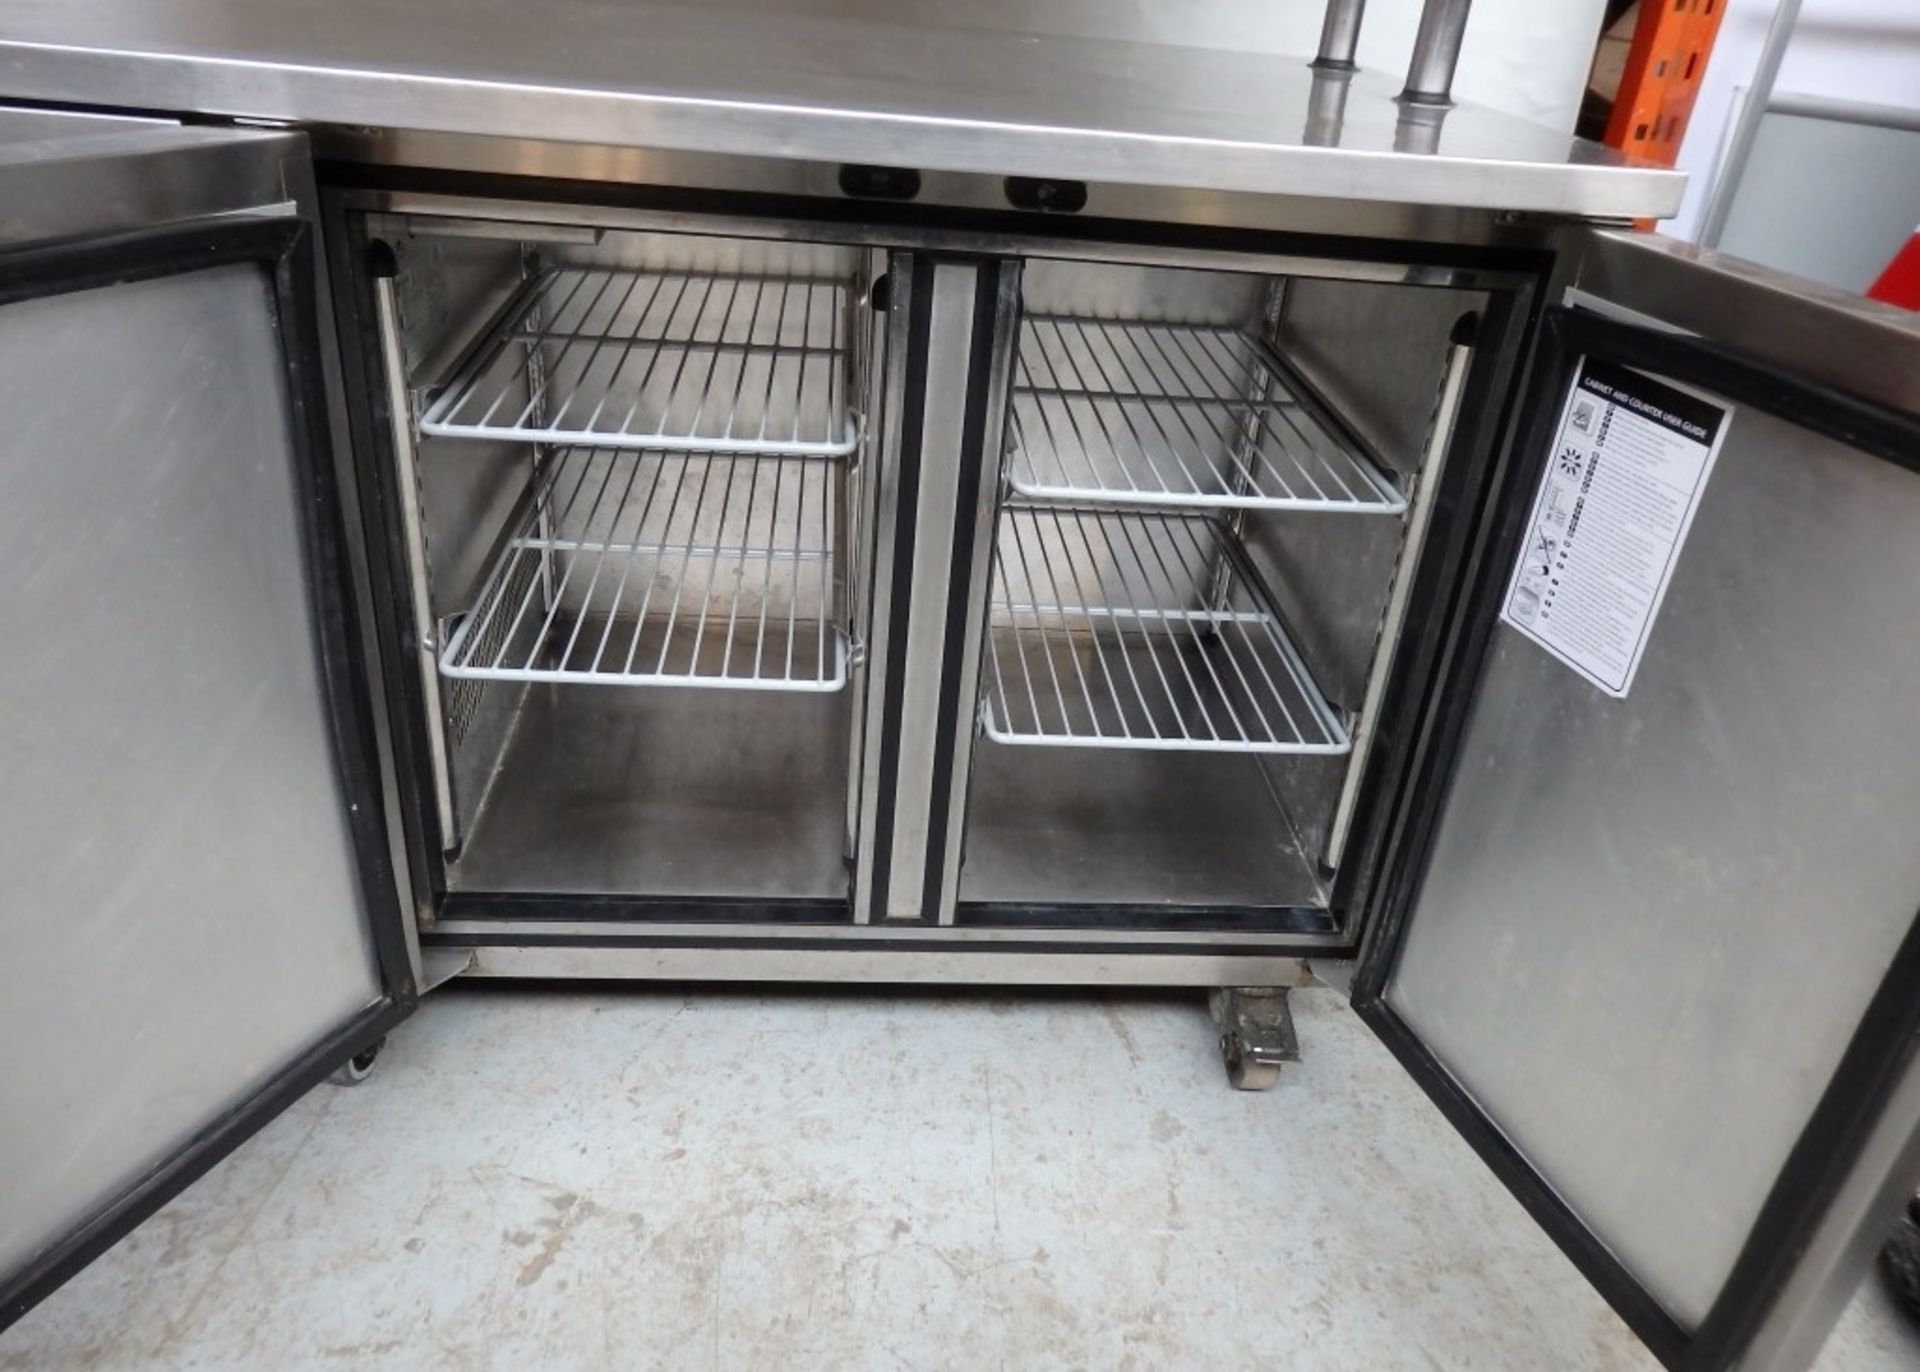 1 x Foster Pro Gastro Refrigerator - On Castors With Overhead Shelving Units - Model PRO1/2L - - Image 7 of 15